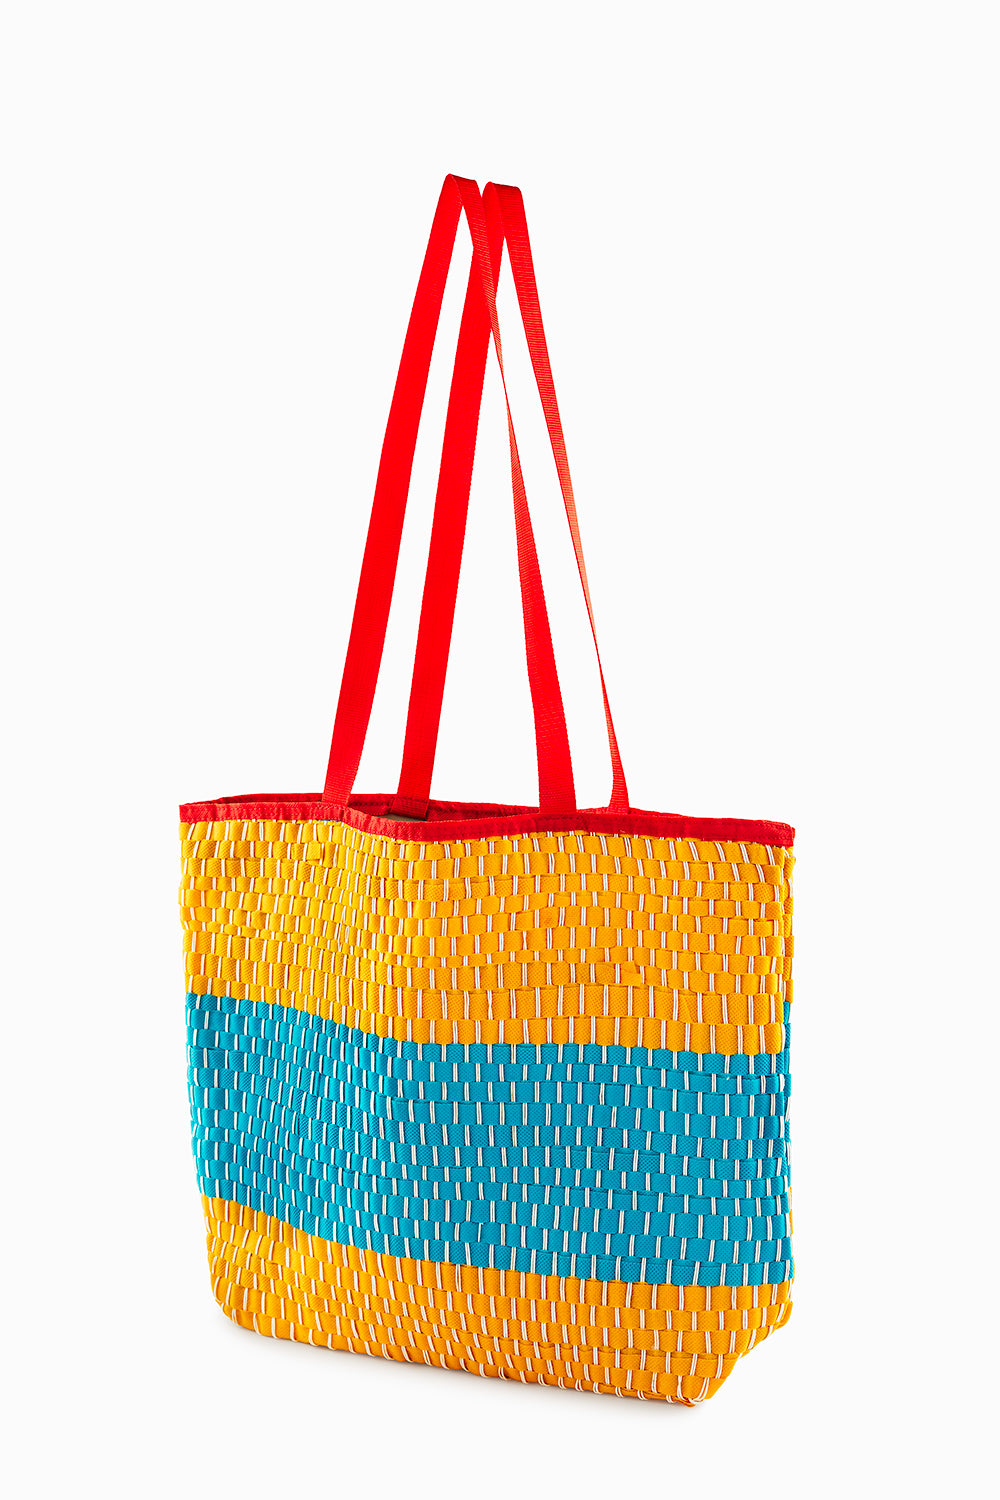 Vivid Yellow & Sky Blue Colored Recycled Non-Woven Fabric Bag